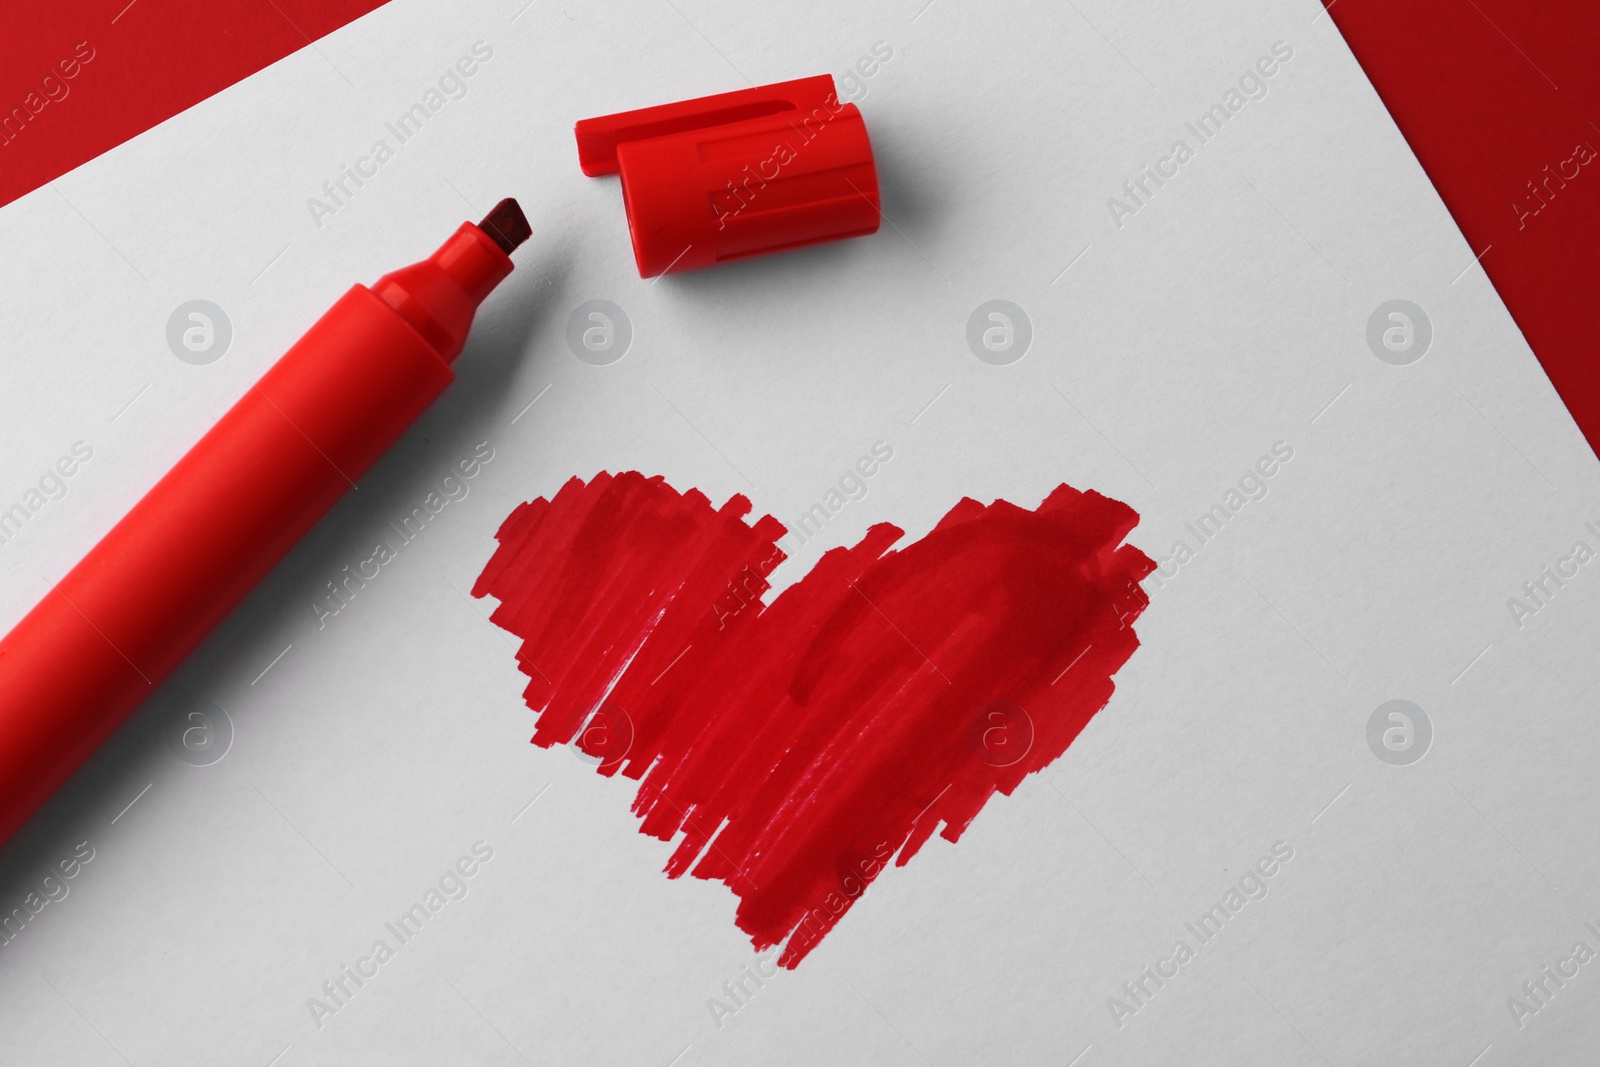 Photo of Red heart drawn on white paper, top view